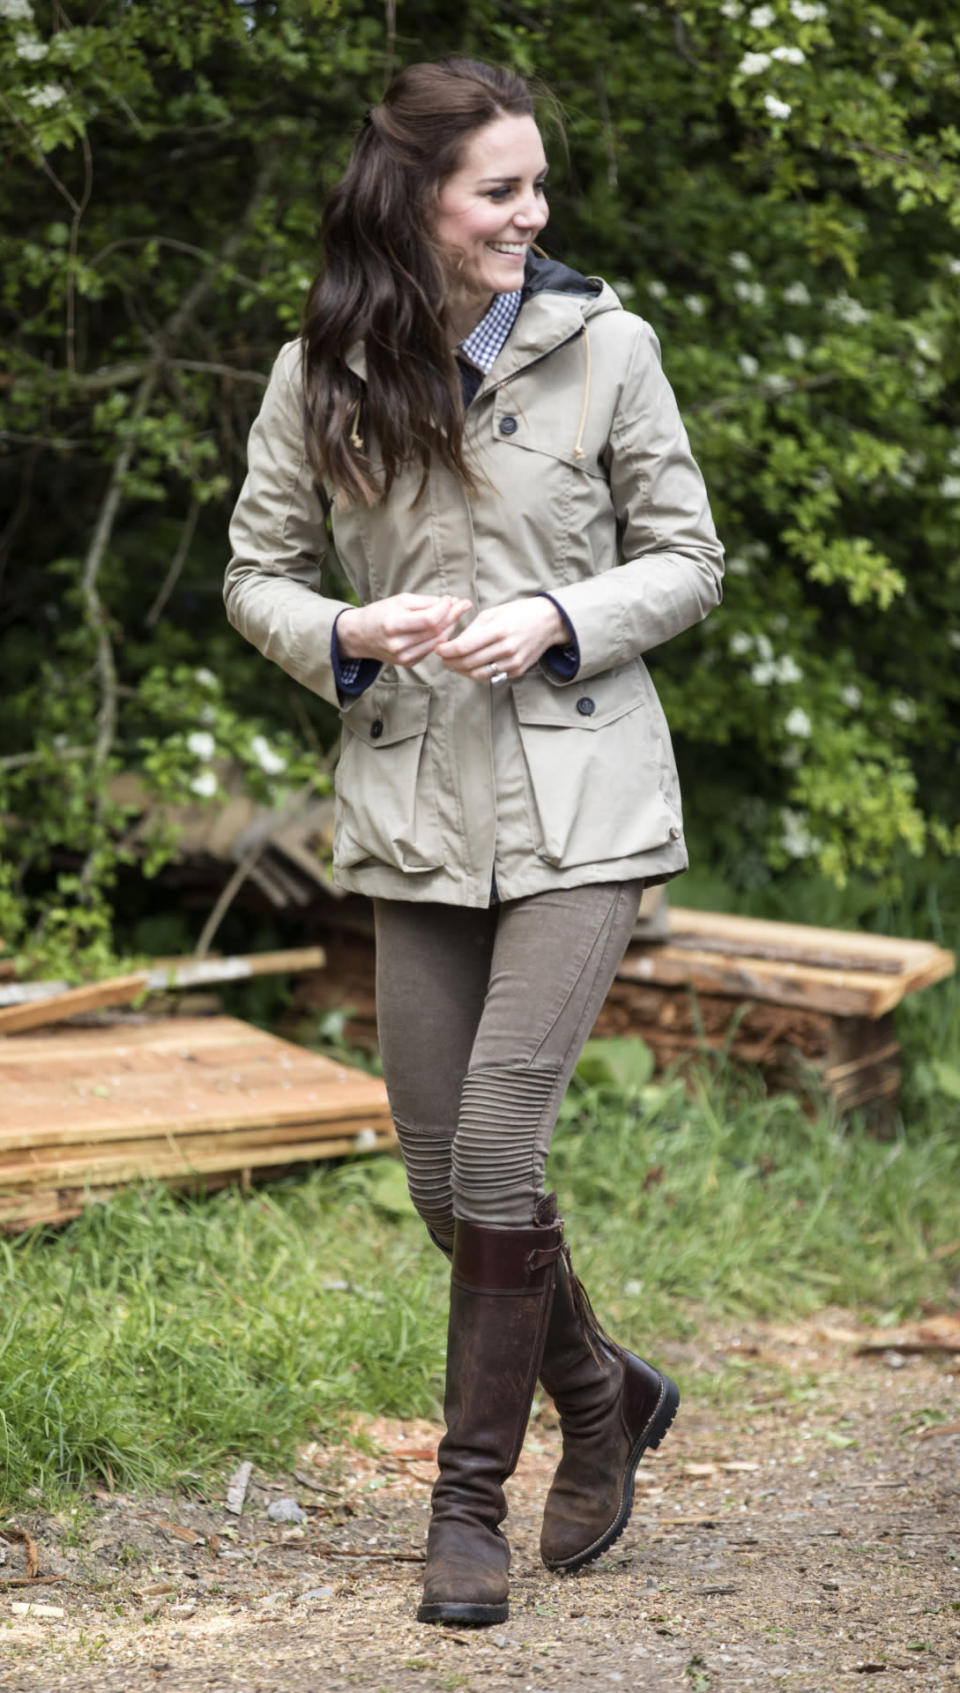 <p>The Duchess dressed down to visit a city farm in Gloucestershire. Wearing a £350 wax parka by Troy London, Kate donned brown biker jeans from Zara, a navy J Crew sweater and gingham shirt from Gap. She finished the neutral ensemble with tasselled Penelope Chilvers boots that she has been wearing for a whopping 13 years. </p><p><i>[Photo: PA]</i></p>